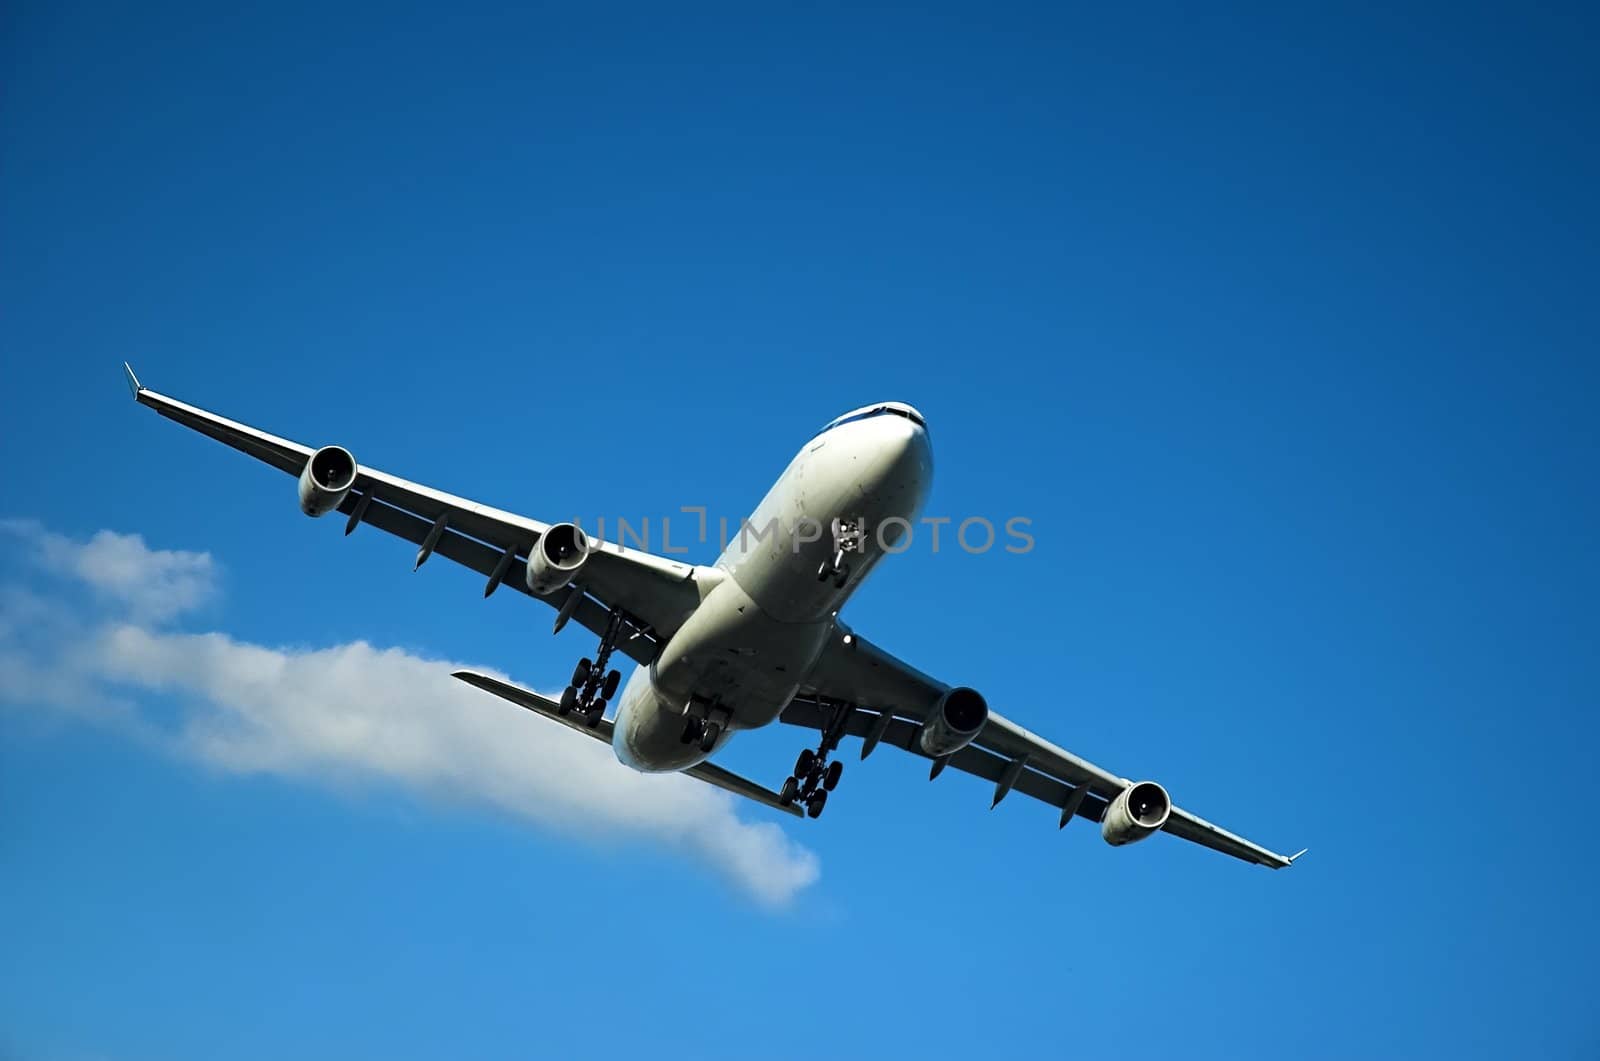 Airplane approaching to land during sunny day